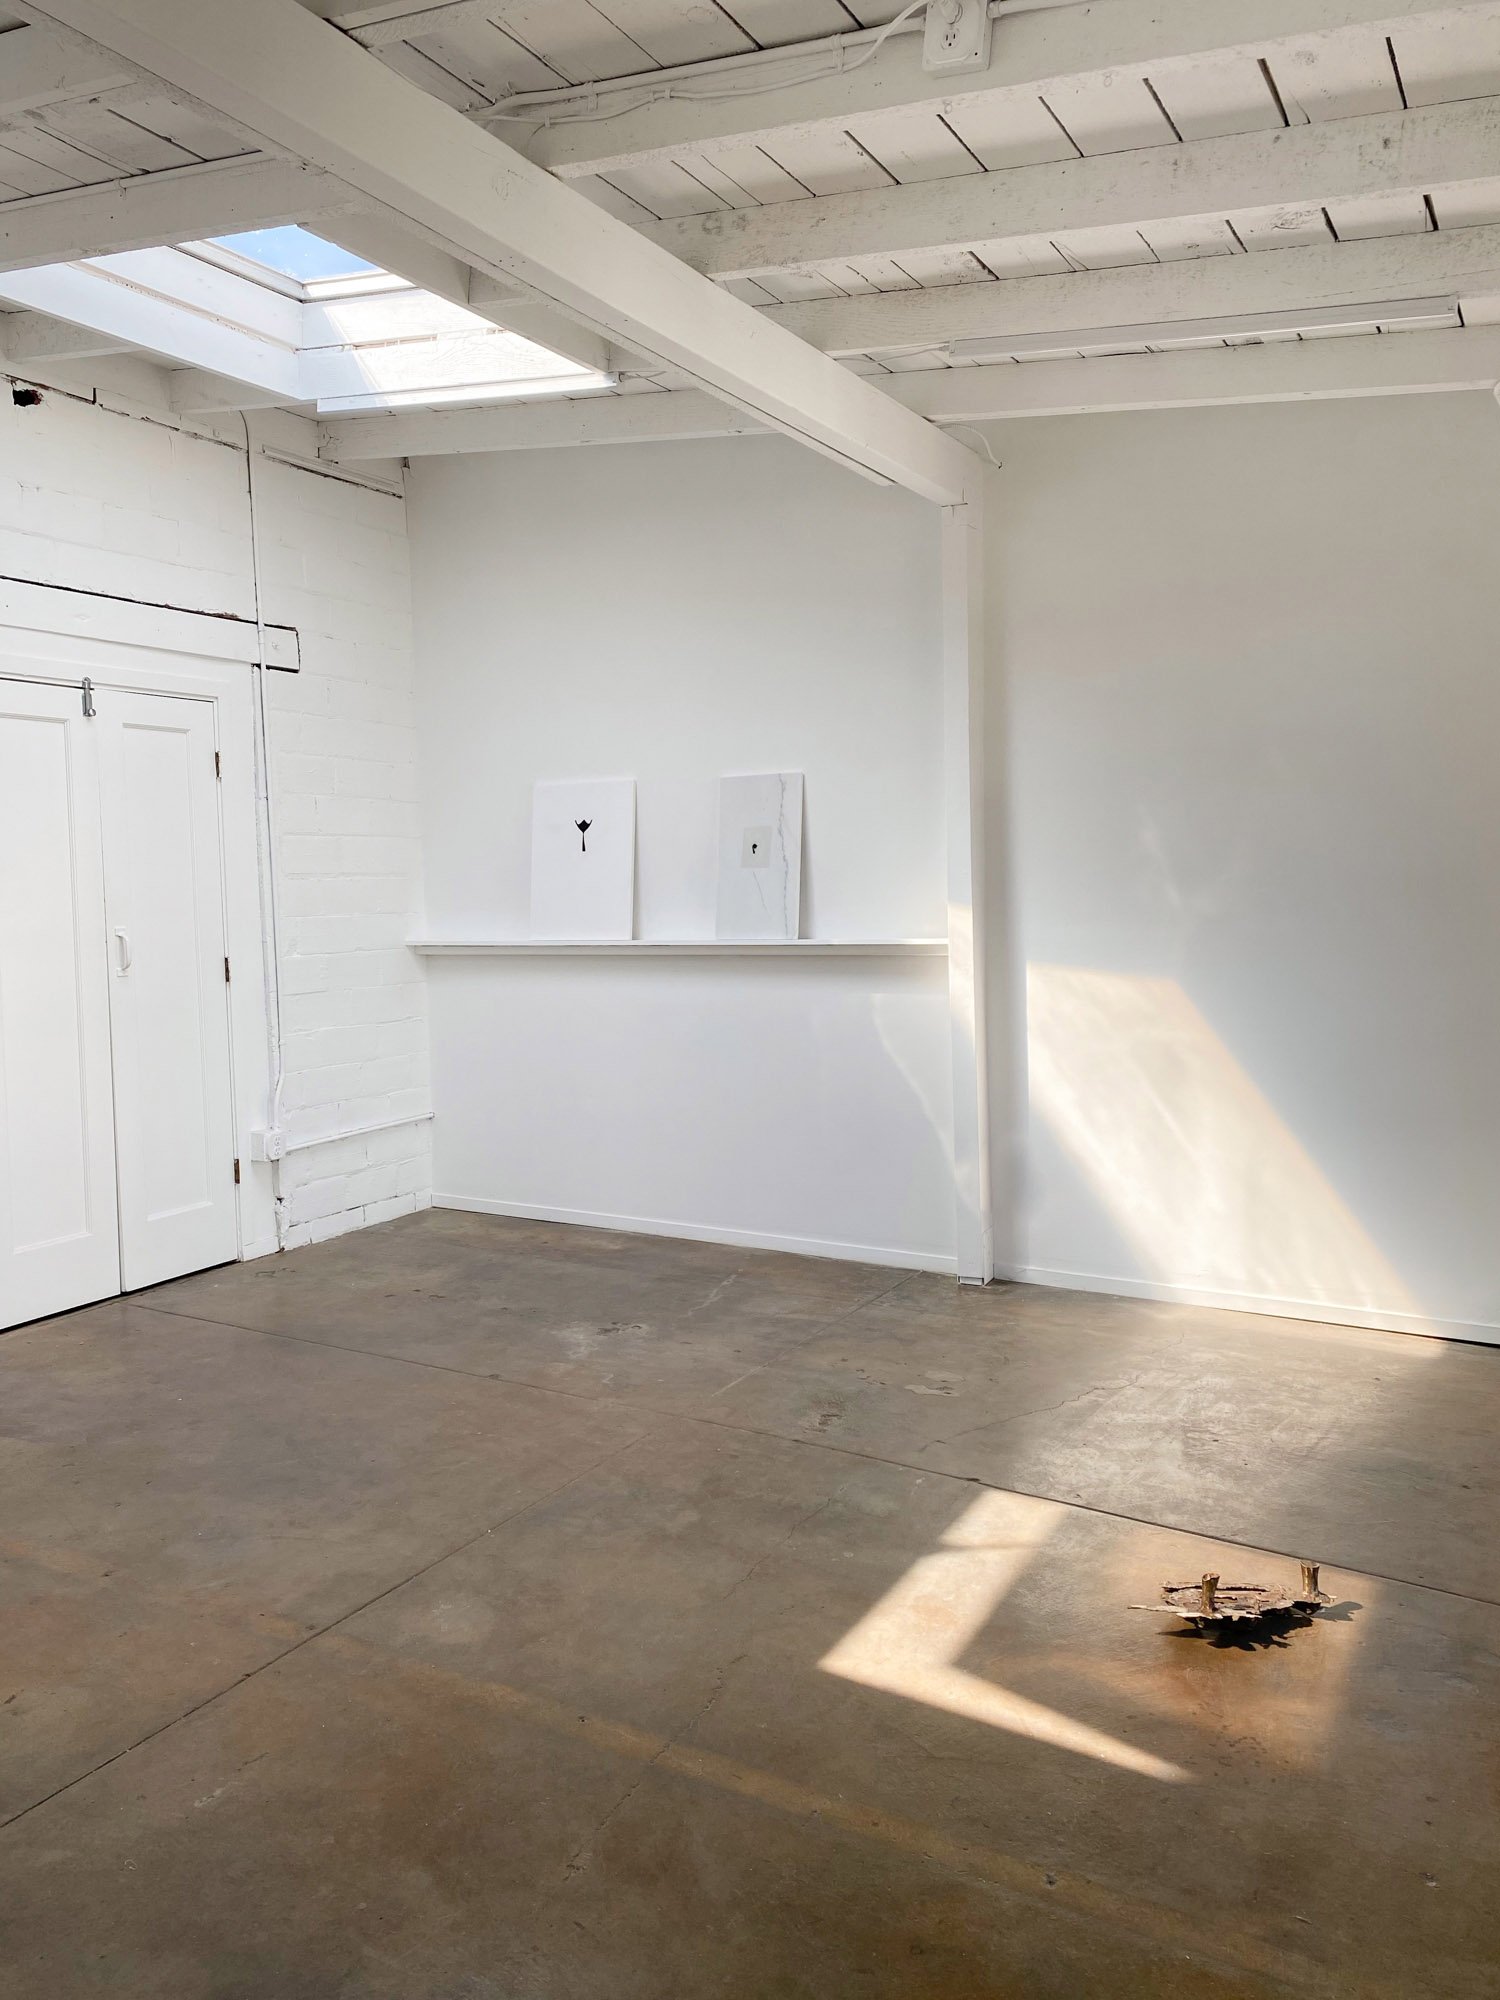   Threshold | Rebeca Bollinger and Léonie Guyer , exhibition view, 2020 